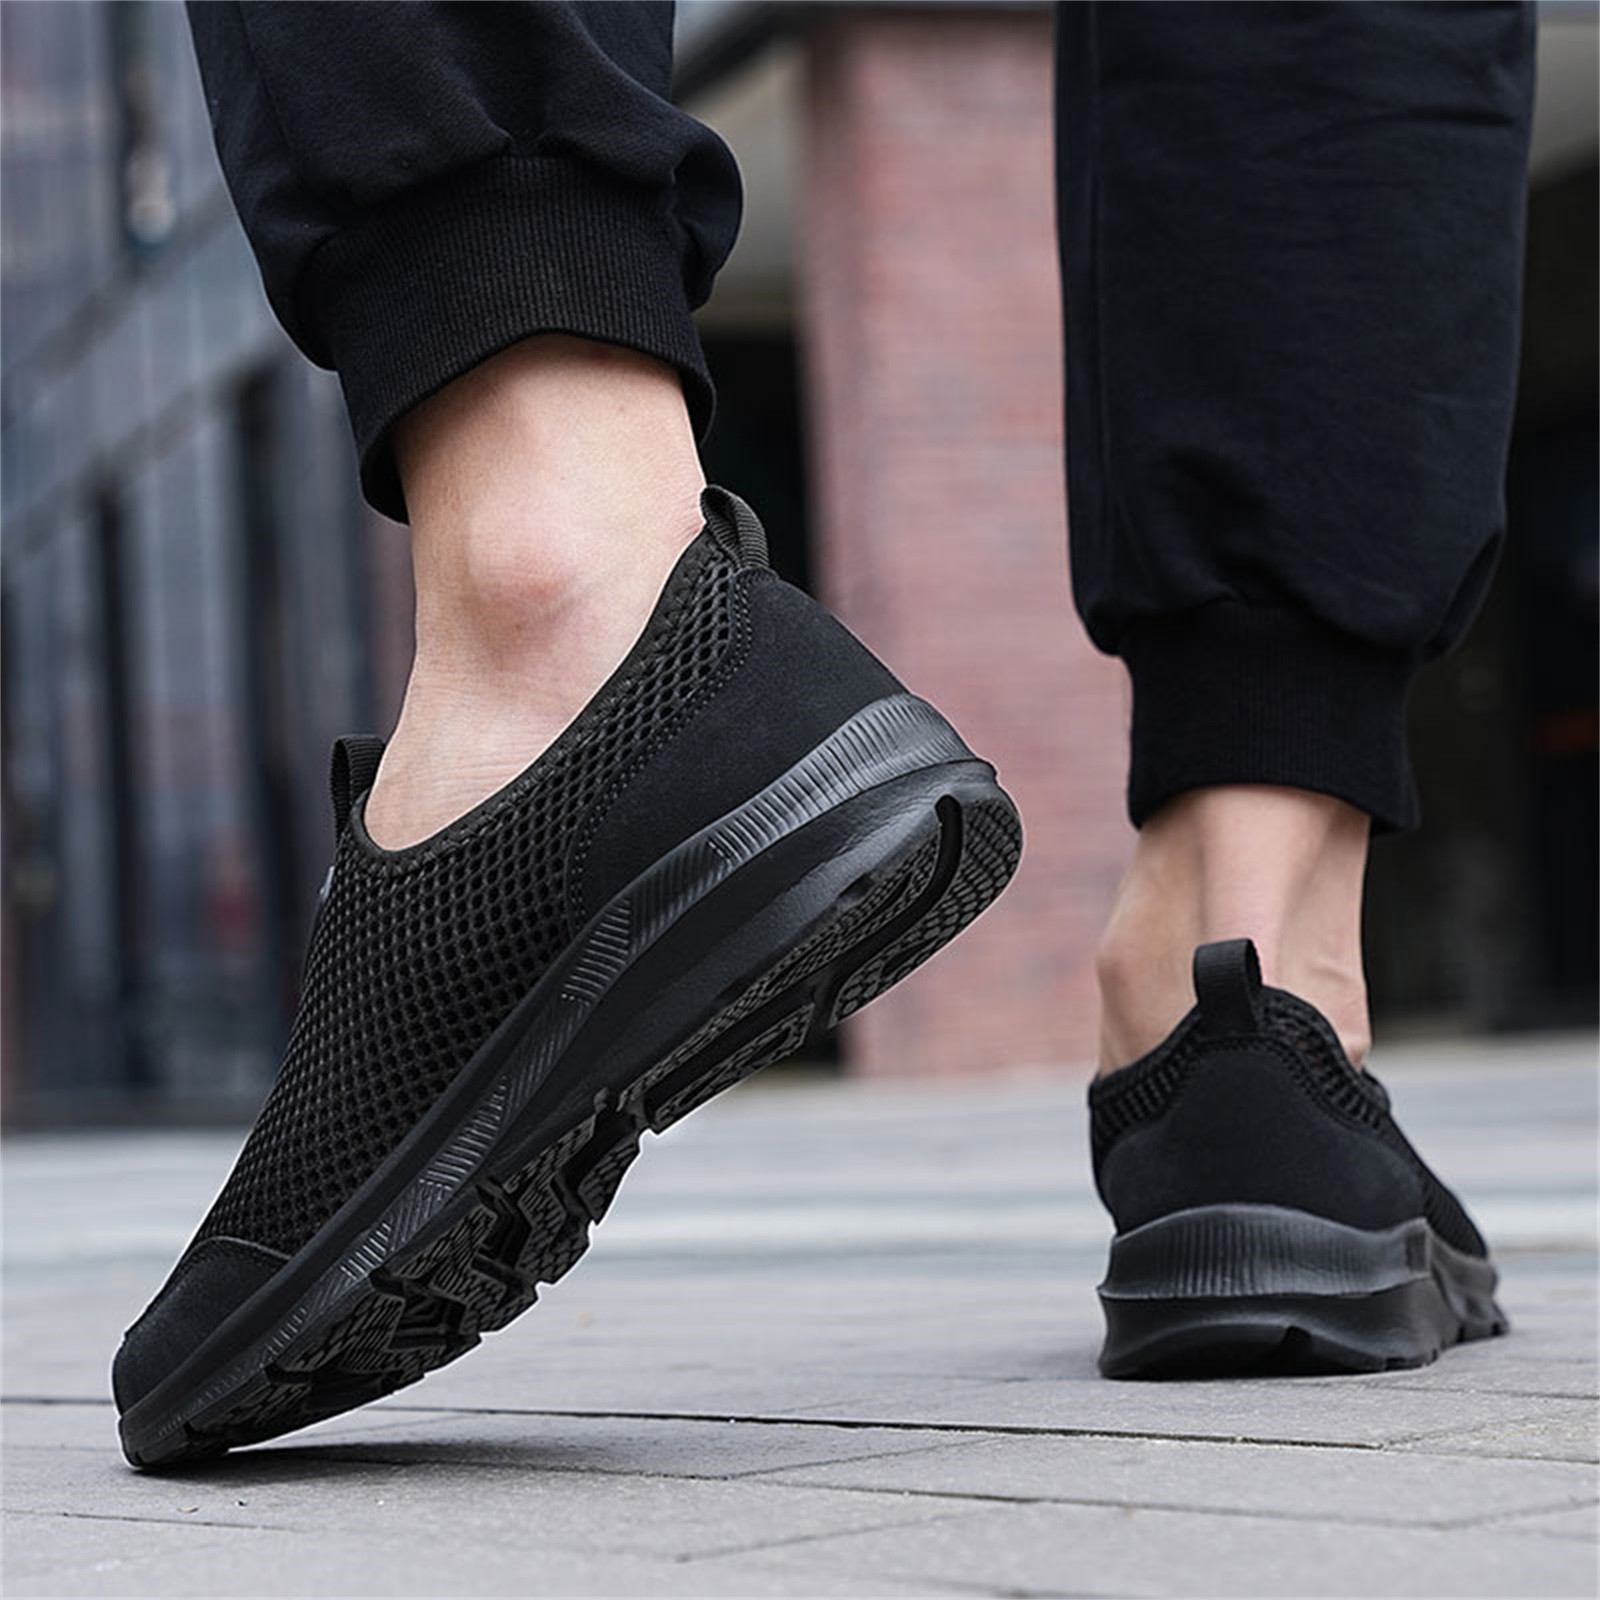 CBGELRT Shoes for Men Casual Men's Sneakers Tennis Shoes Men Fashion Summer Men Sneakers Breathable Mesh Shallow Lace up Casual Shoes Male Black 48 - image 5 of 9